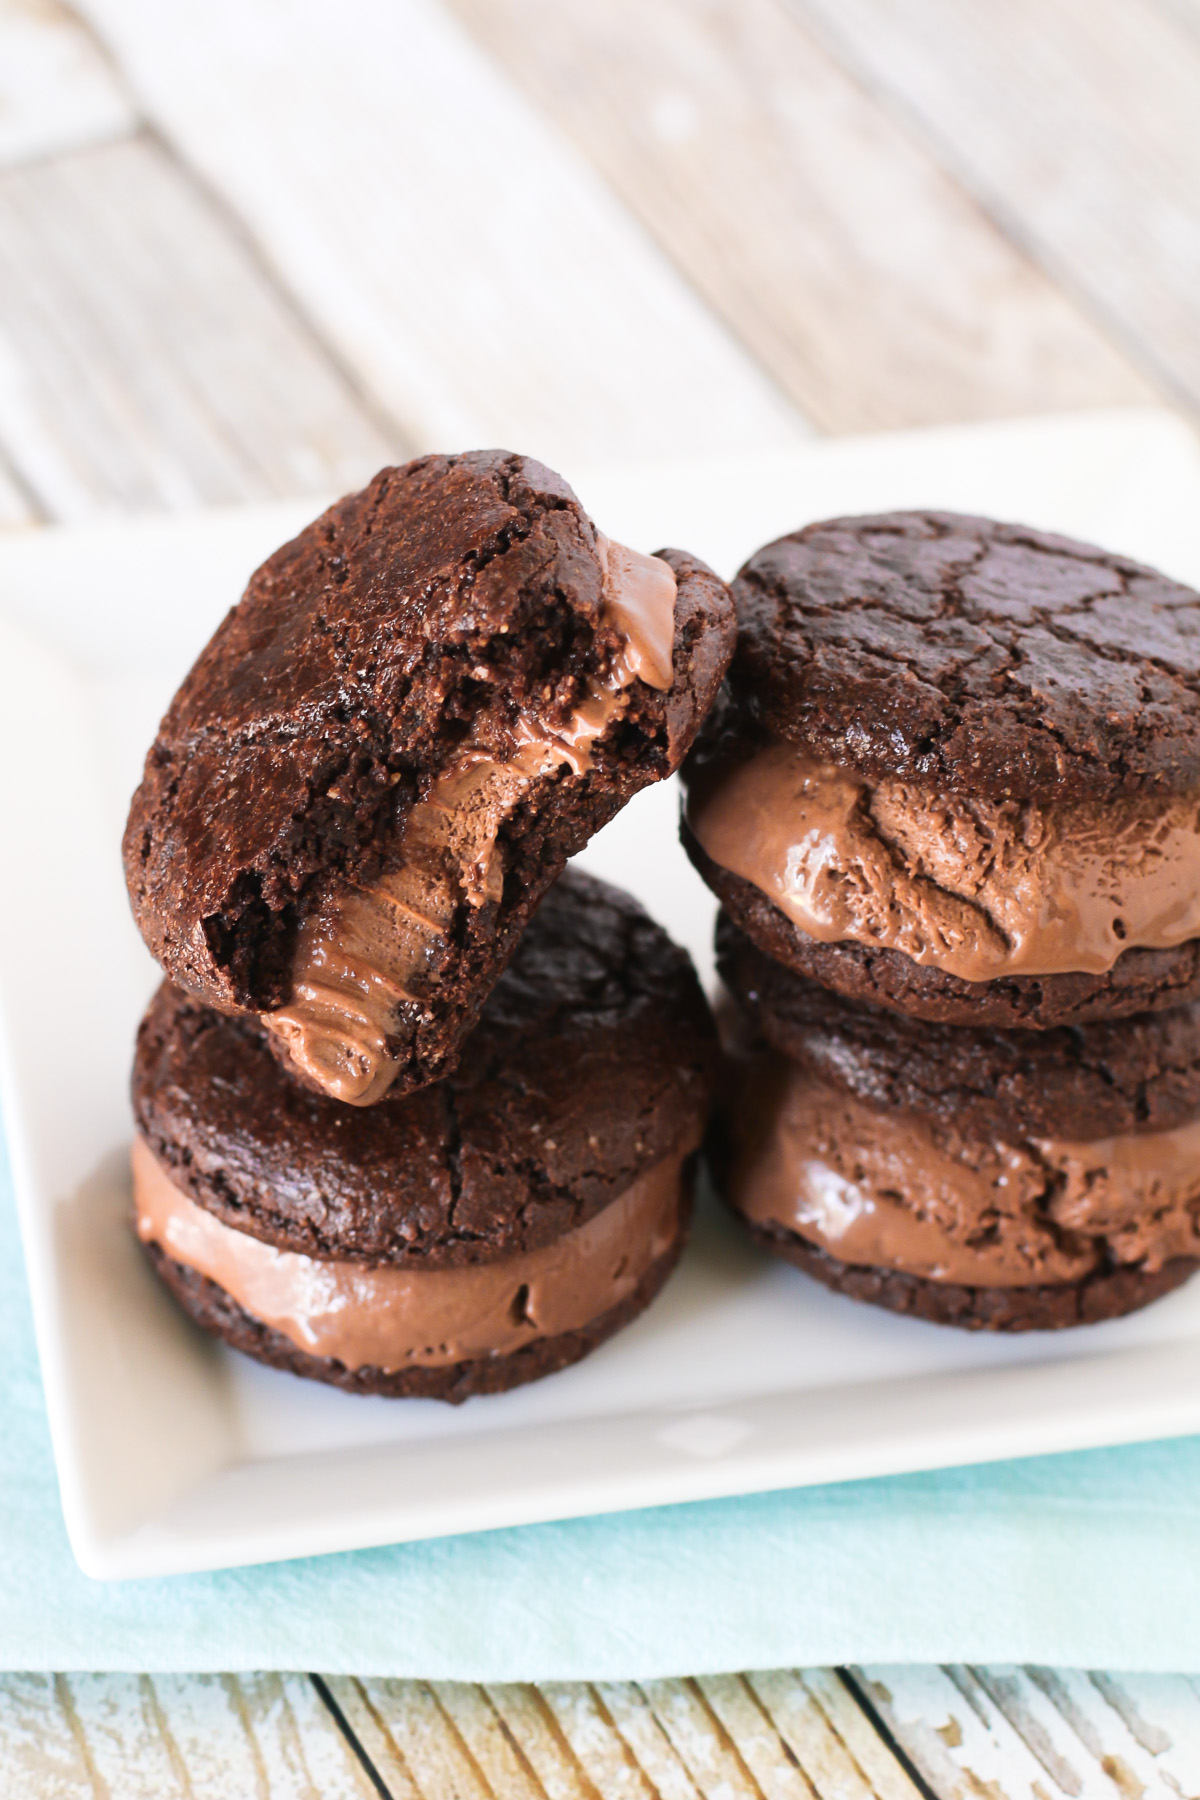 Gluten Free Vegan Brownie Ice Cream Sandwiches. Incredibly decadent and insanely delicious!